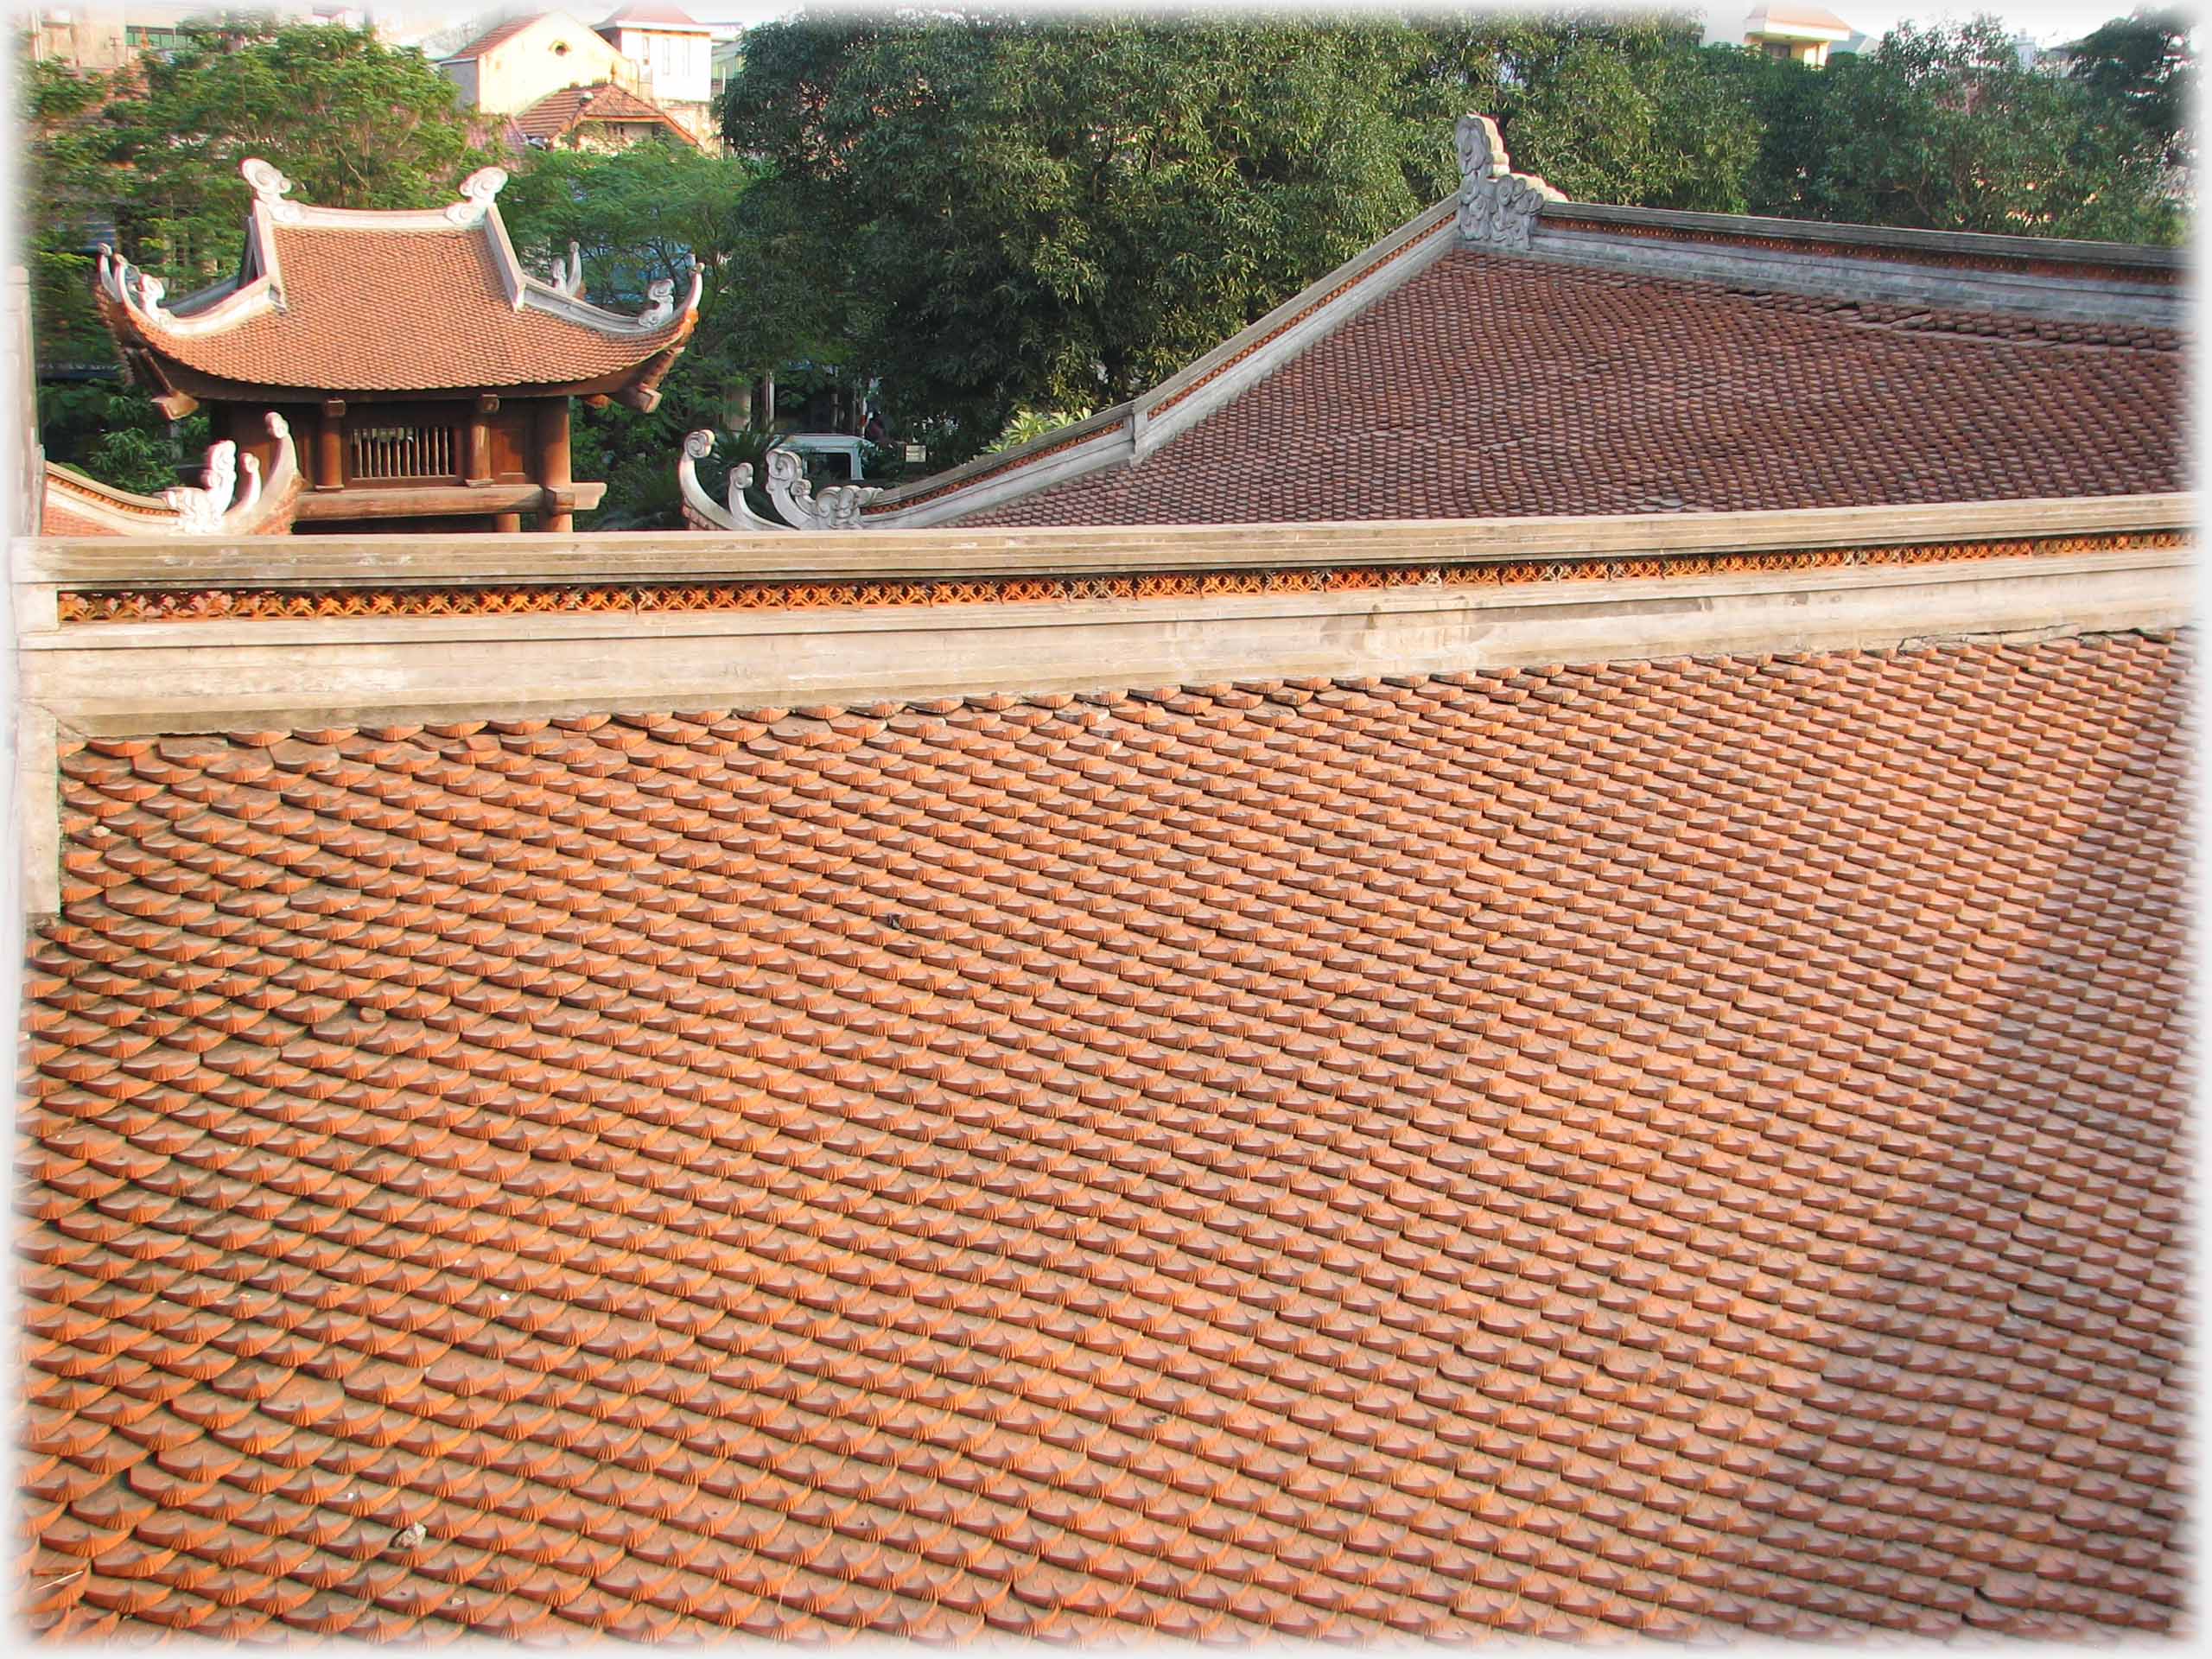 Large expanse of tiled roof with apparently small building beyond.